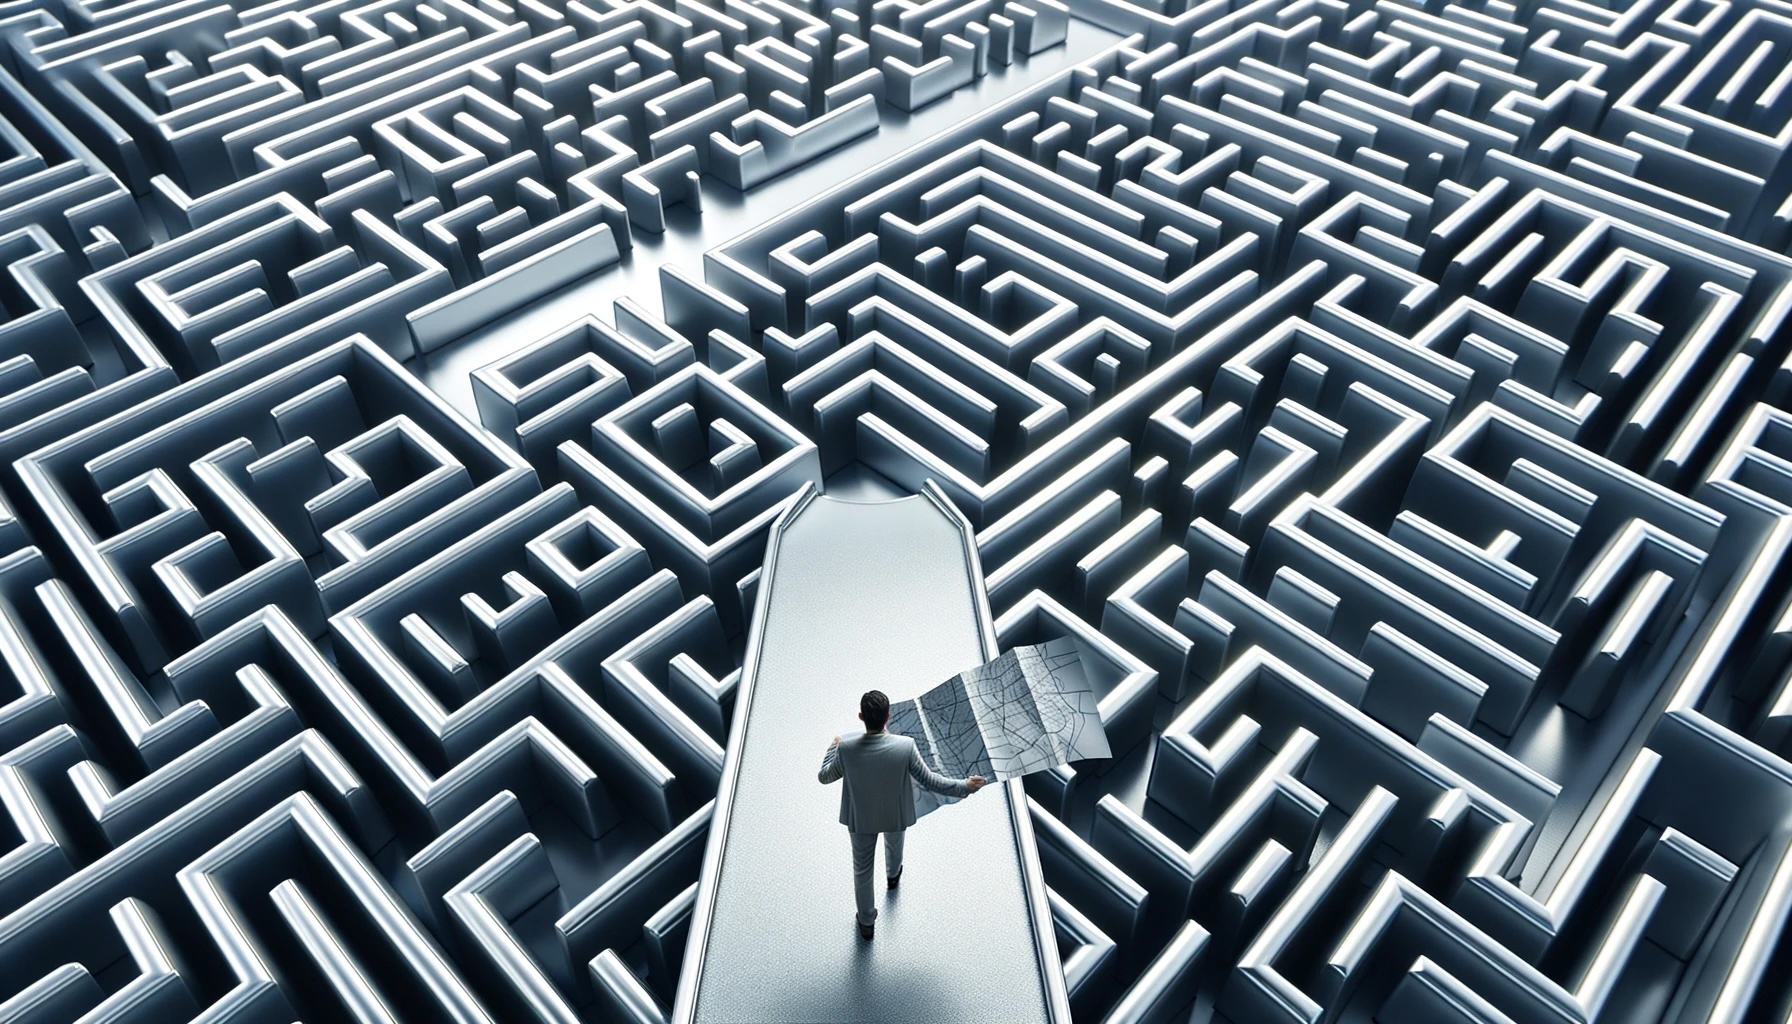 An aerial view of a vast silver maze with a single person at the entrance holding a map, representing the journey of a Marketing novice.